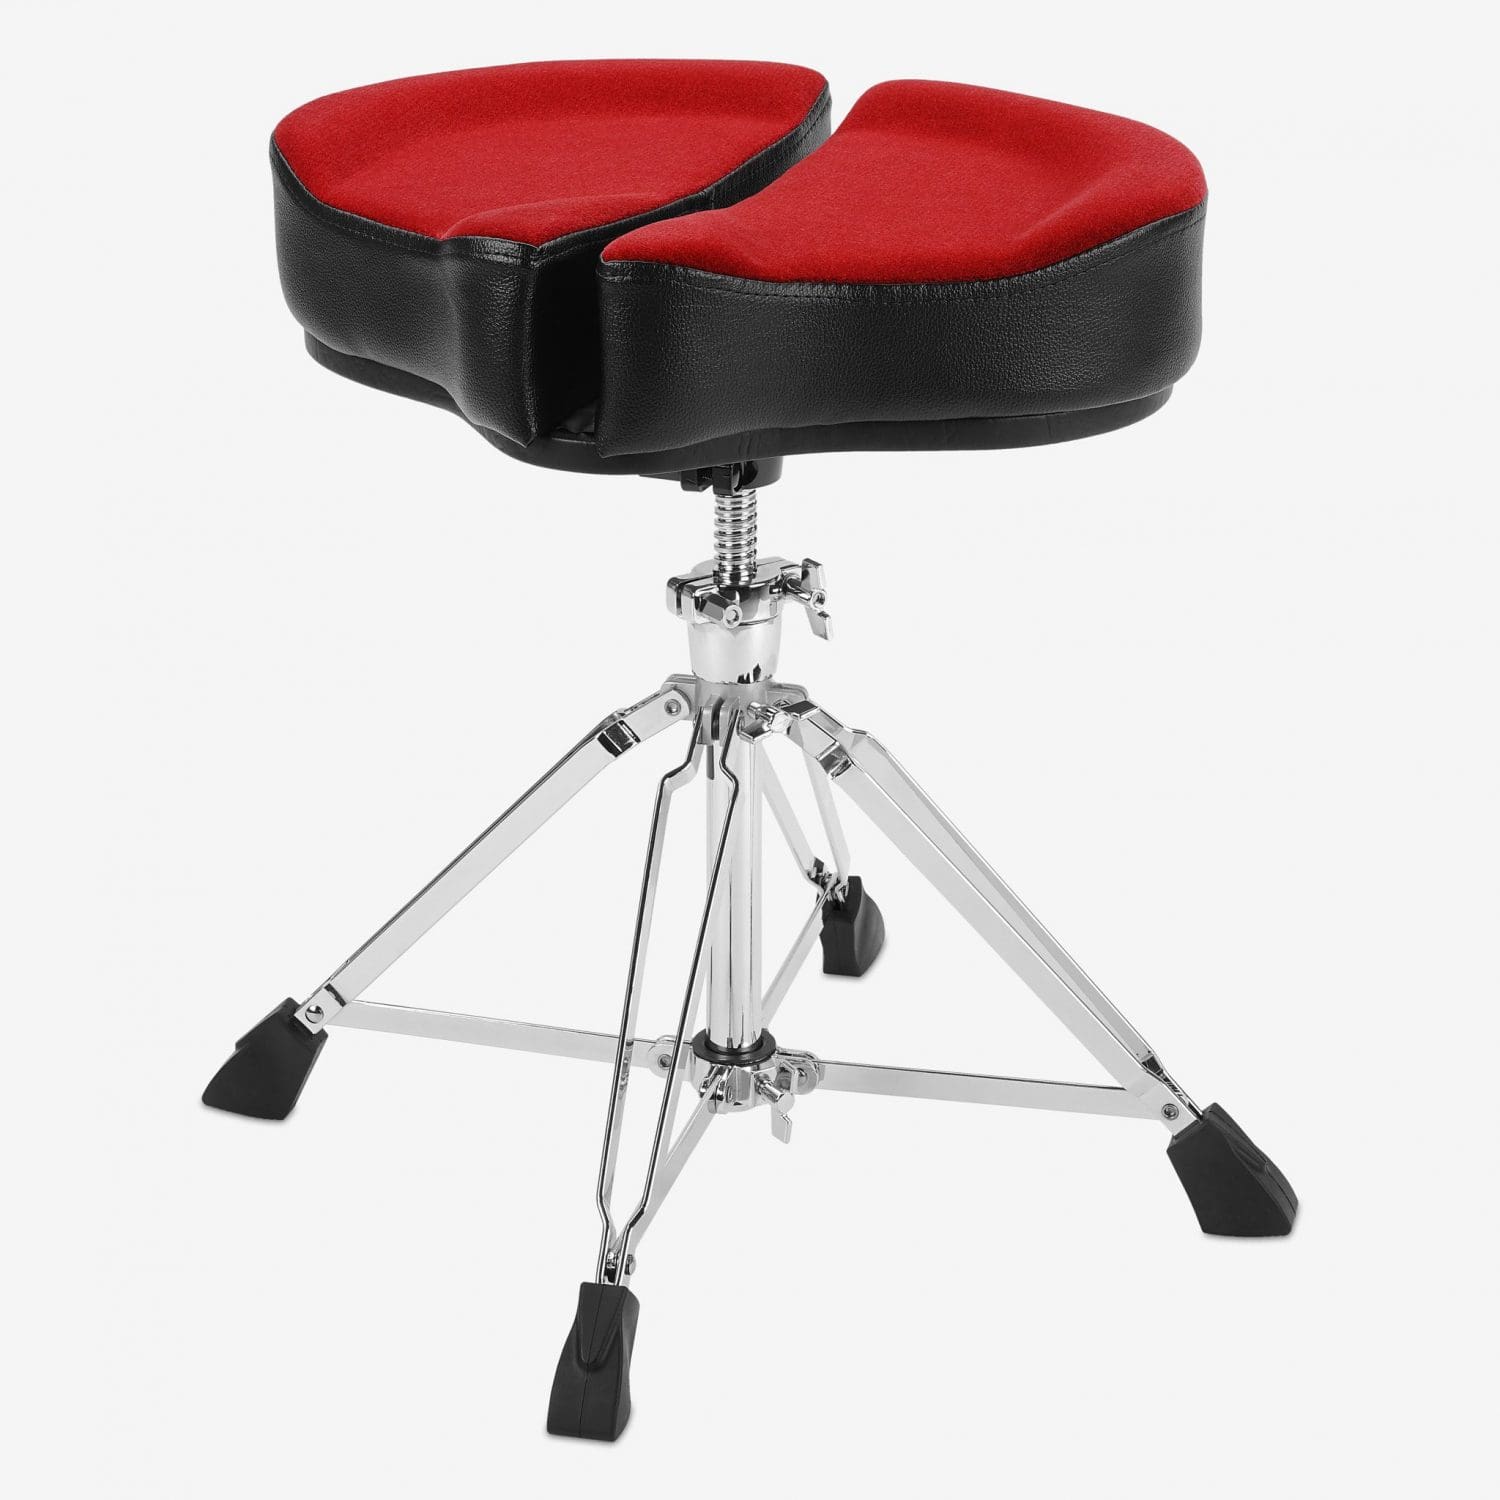 Spinal-G Saddle Top Throne